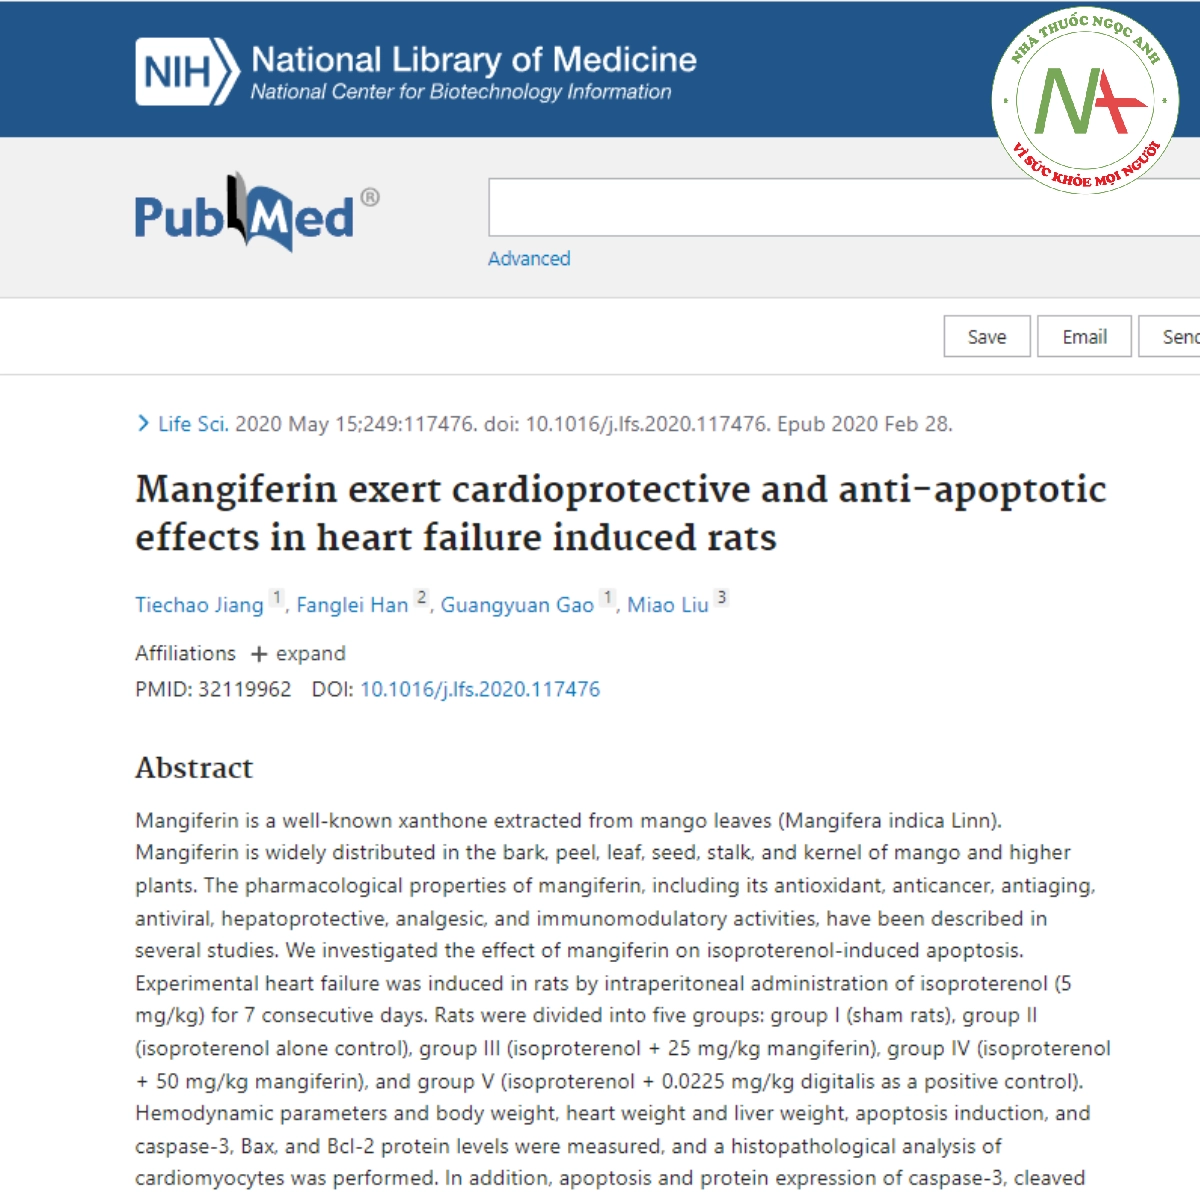 Mangiferin exert cardioprotective and anti-apoptotic effects in heart failure induced rats